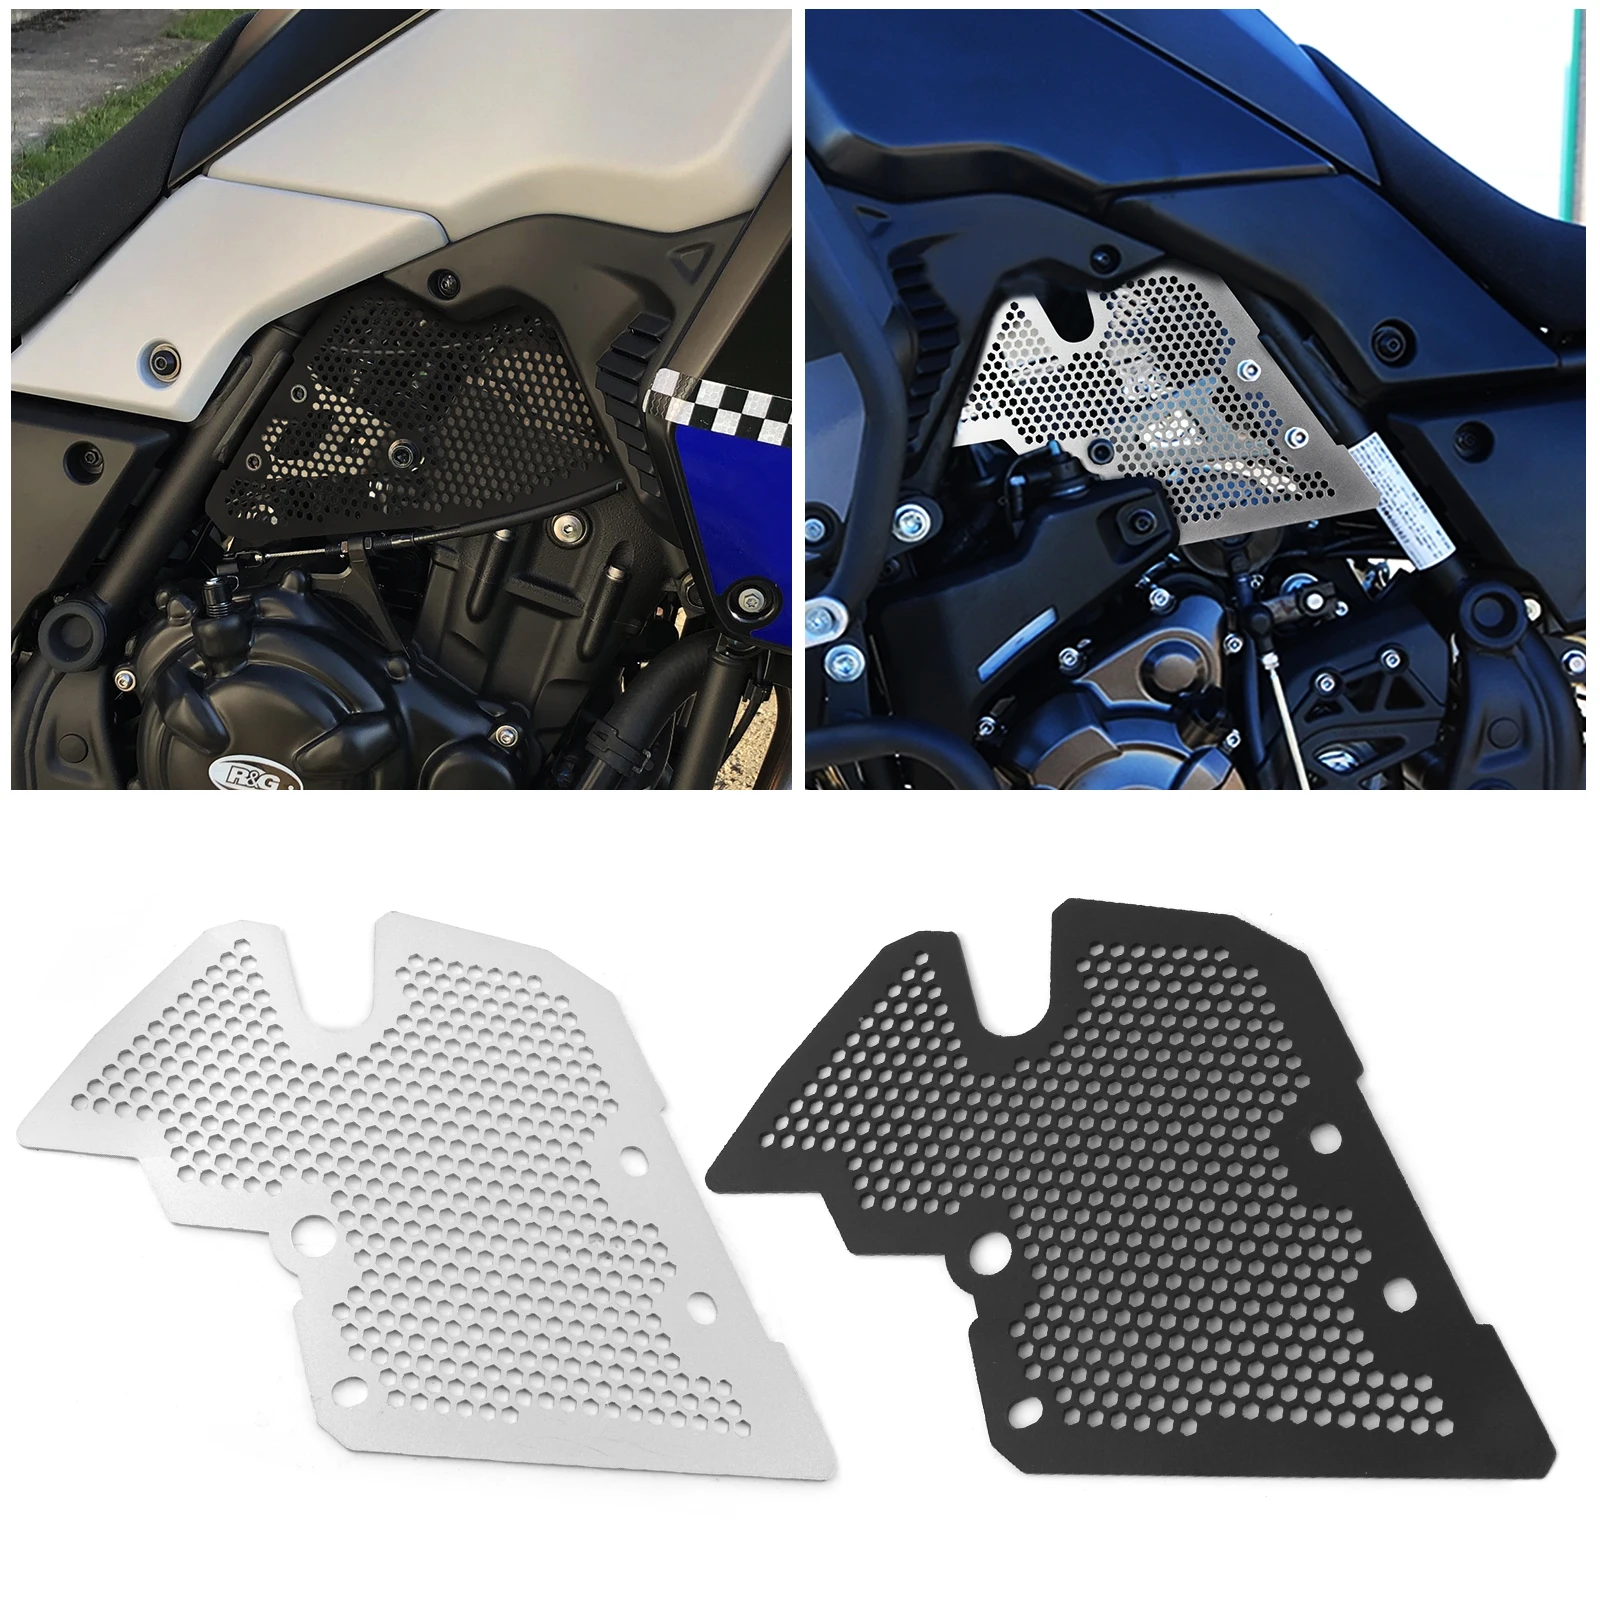 Motorcycle Engine Cover Guard Motor Protective Cover Throttle Cam Protector Crap Flap For 2019-2021 Yamaha Tenere 700 XTZ700 T7